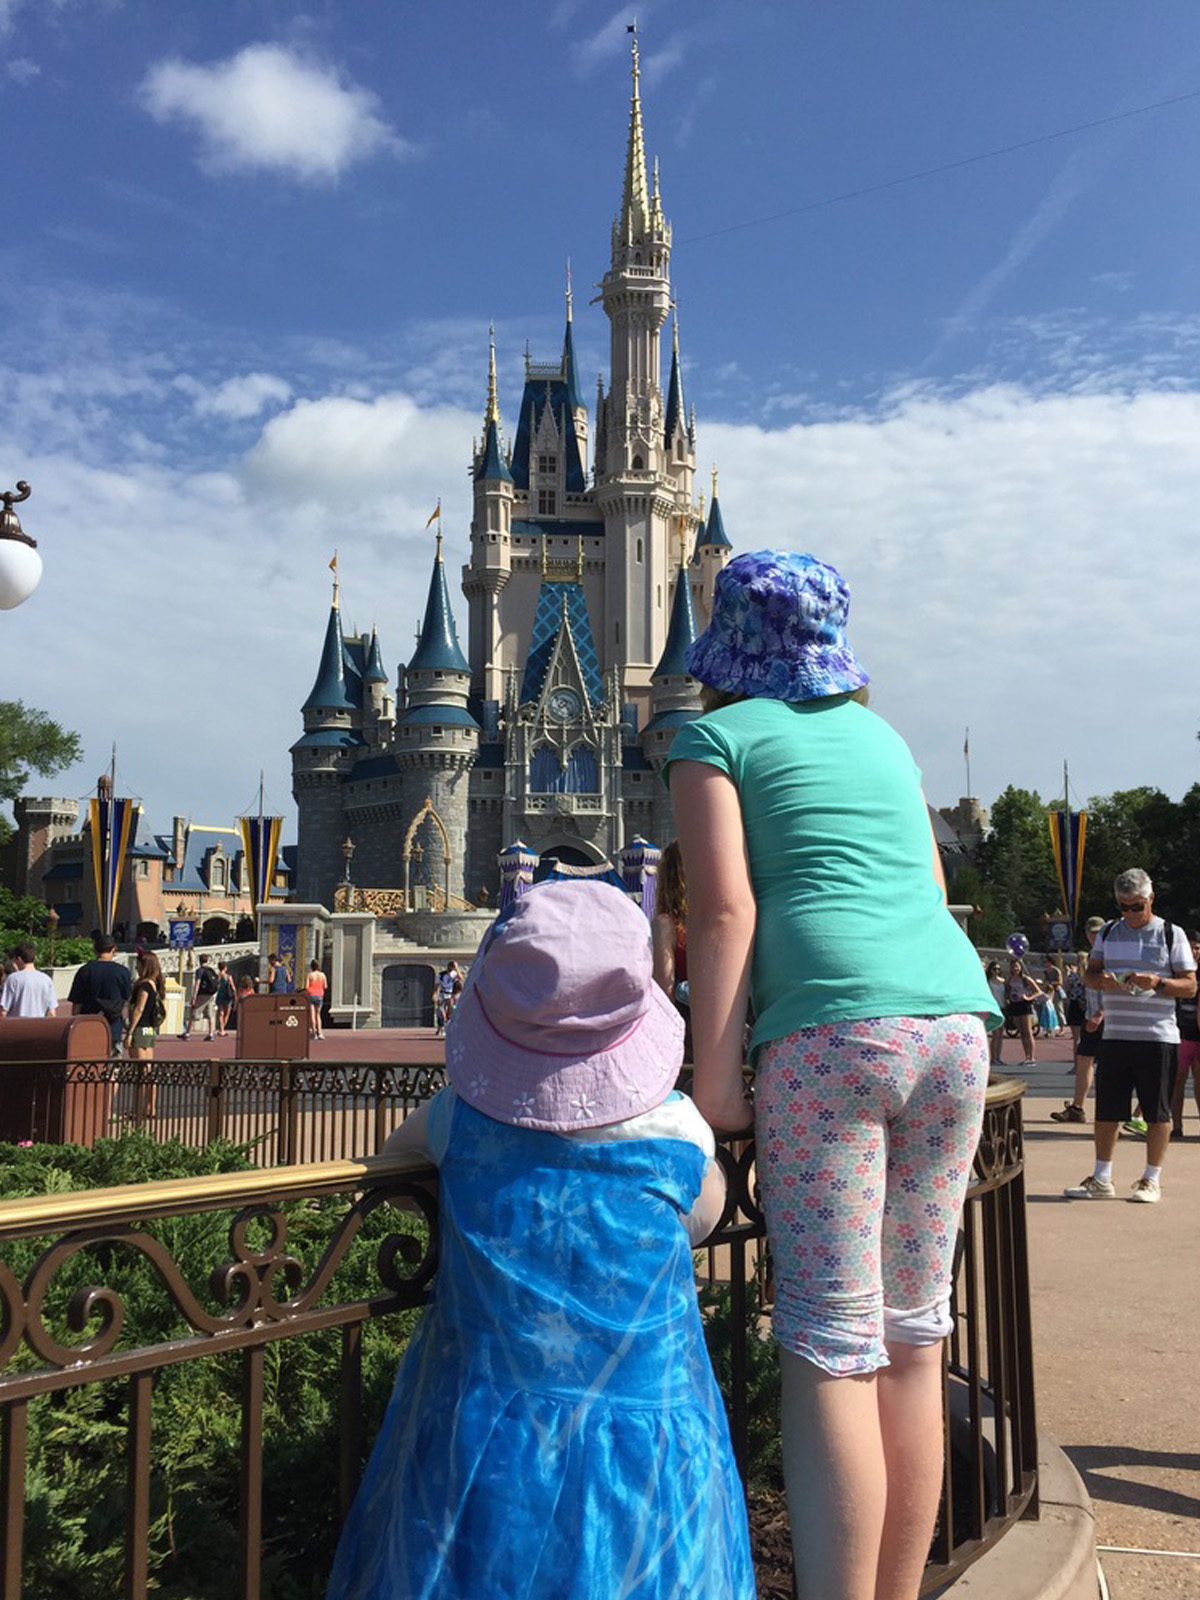 Image of two children looking at the Cinderella Castle in Disney World